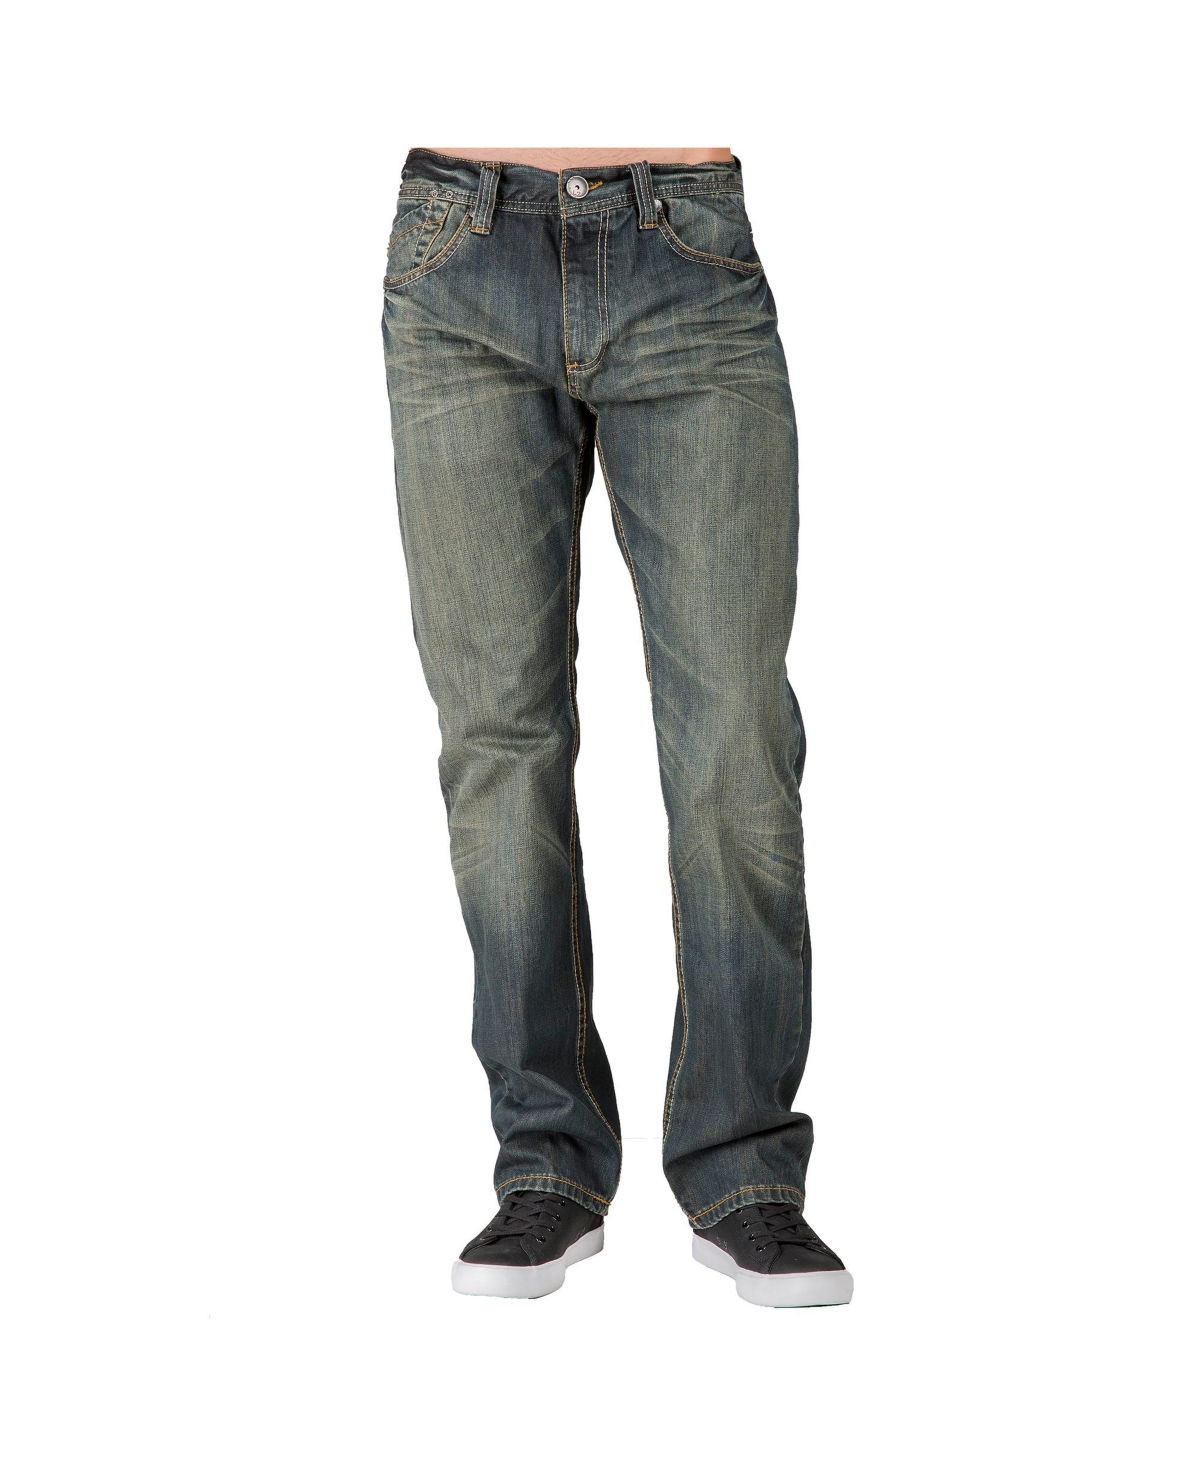 Men's Relaxed Straight Handcrafted Wash Premium Denim Signature Jeans - Open Blue